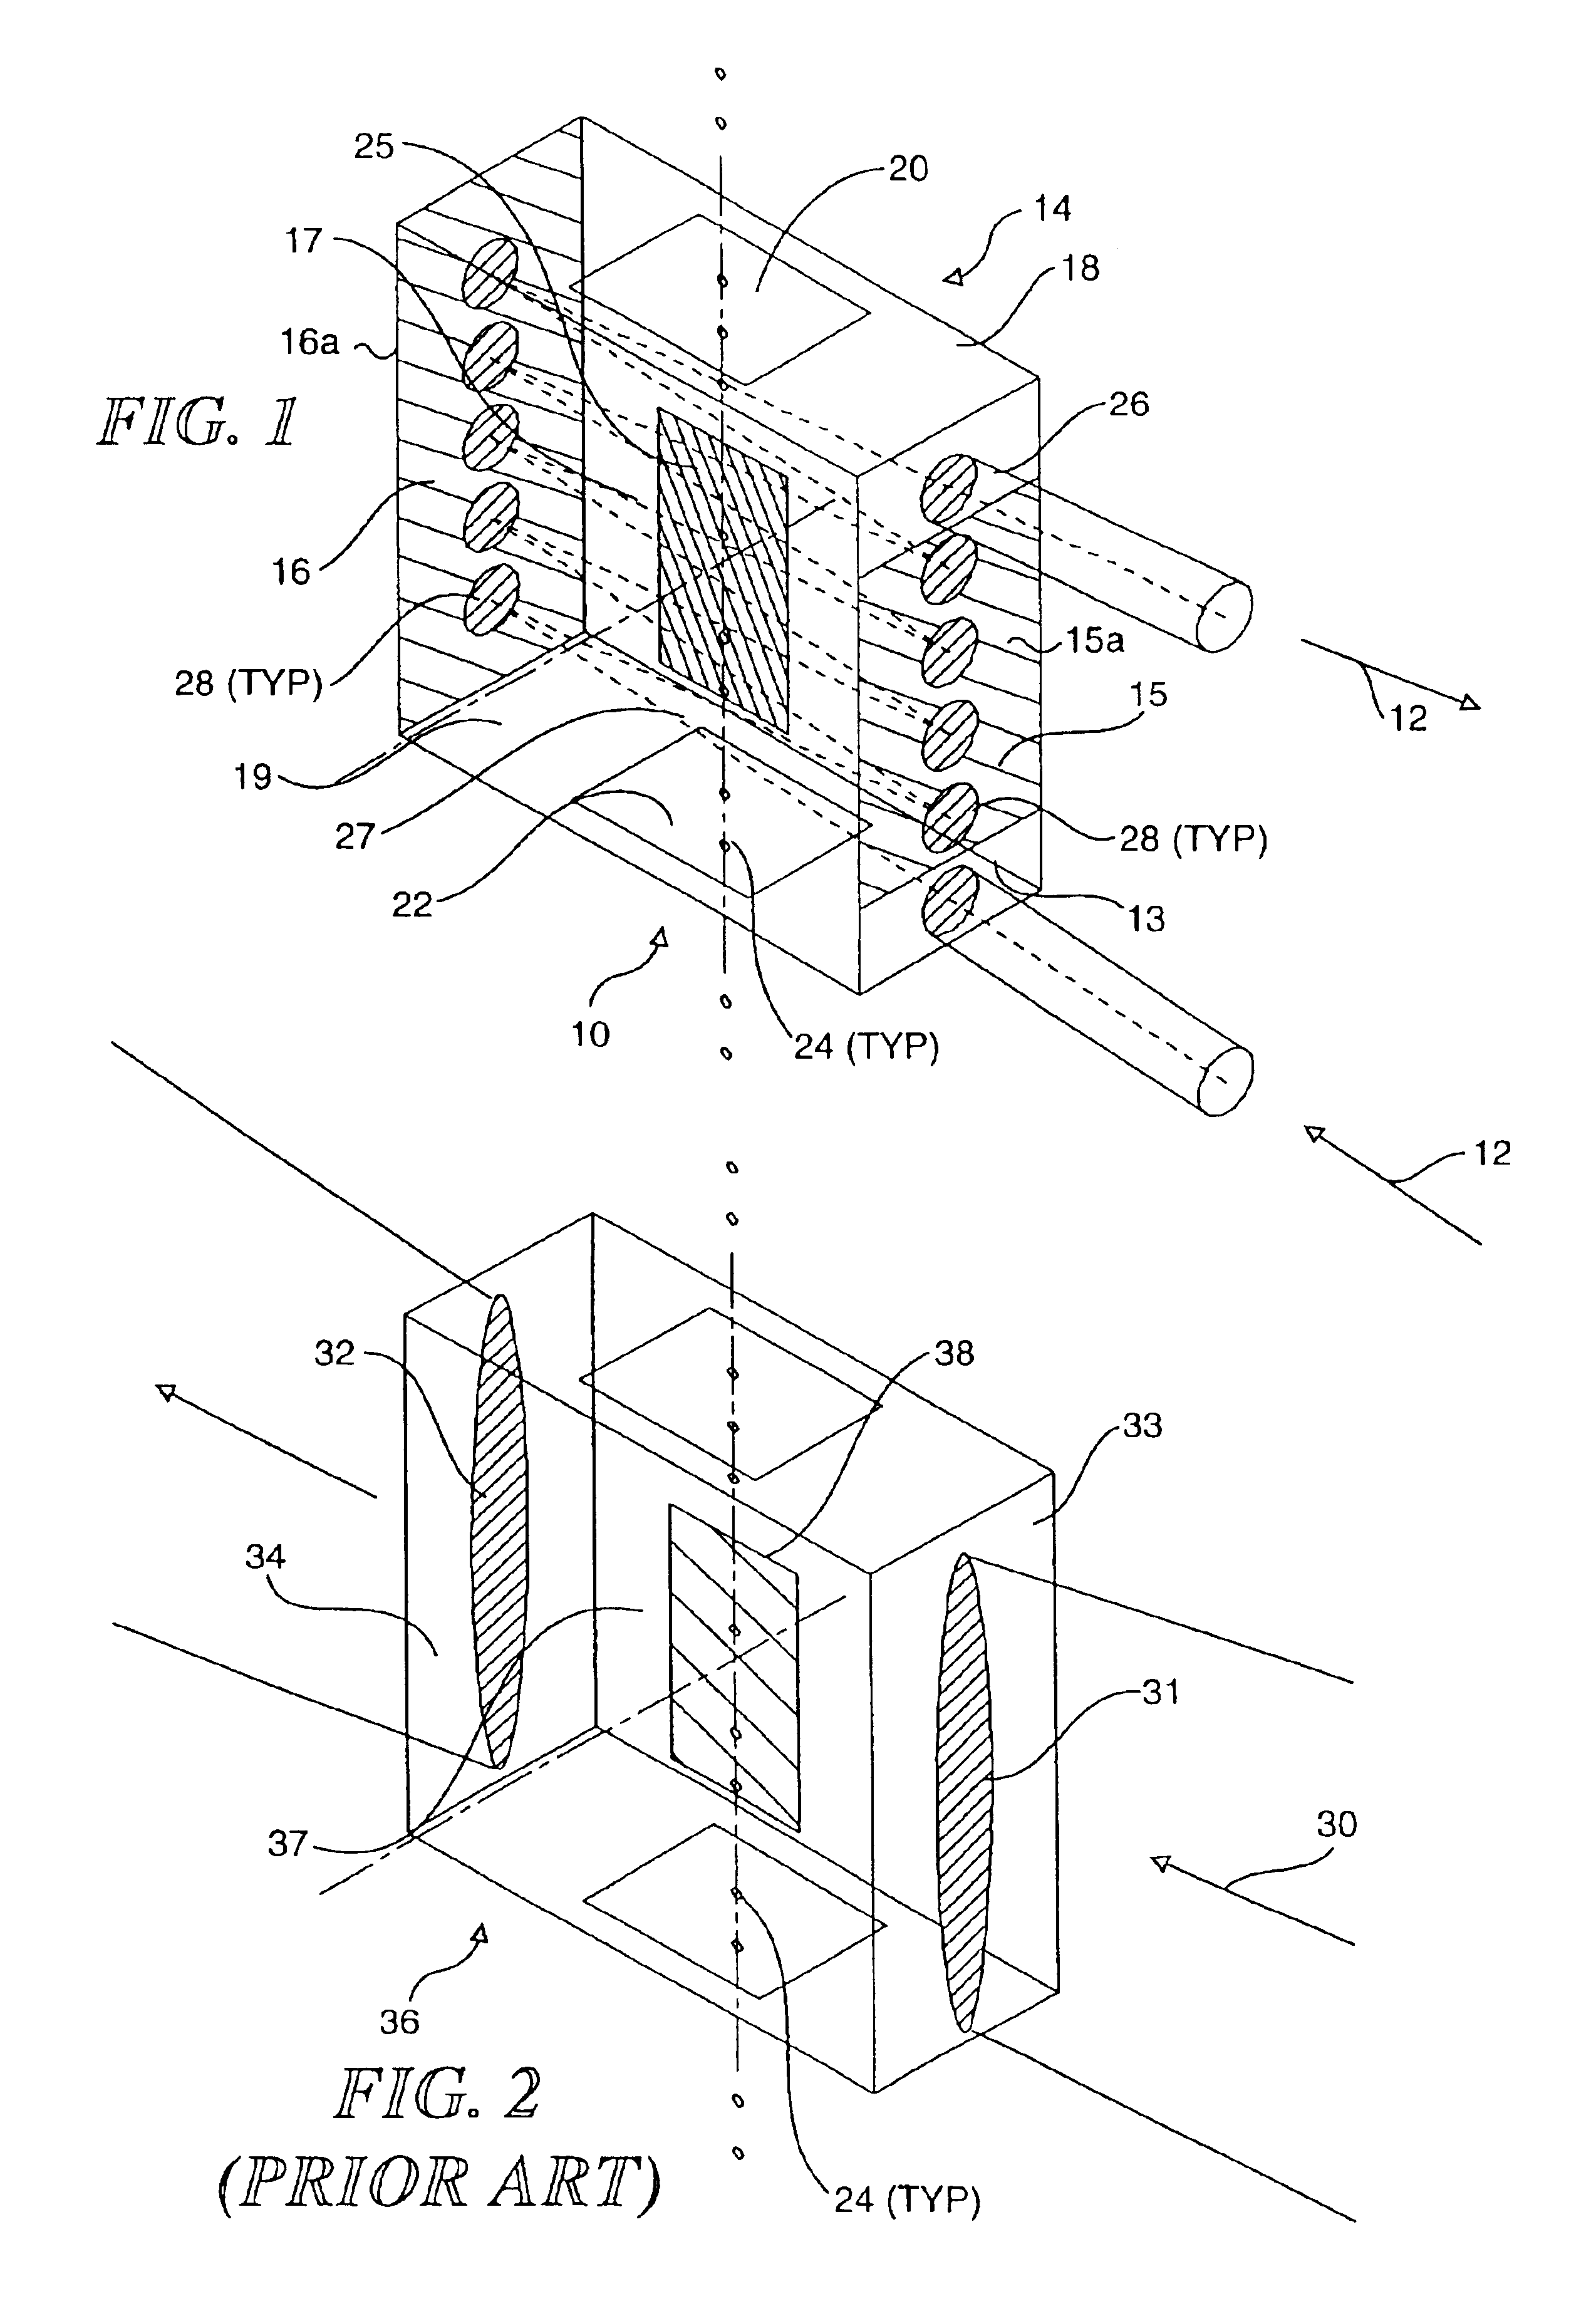 Multipass cavity for illumination and excitation of moving objects